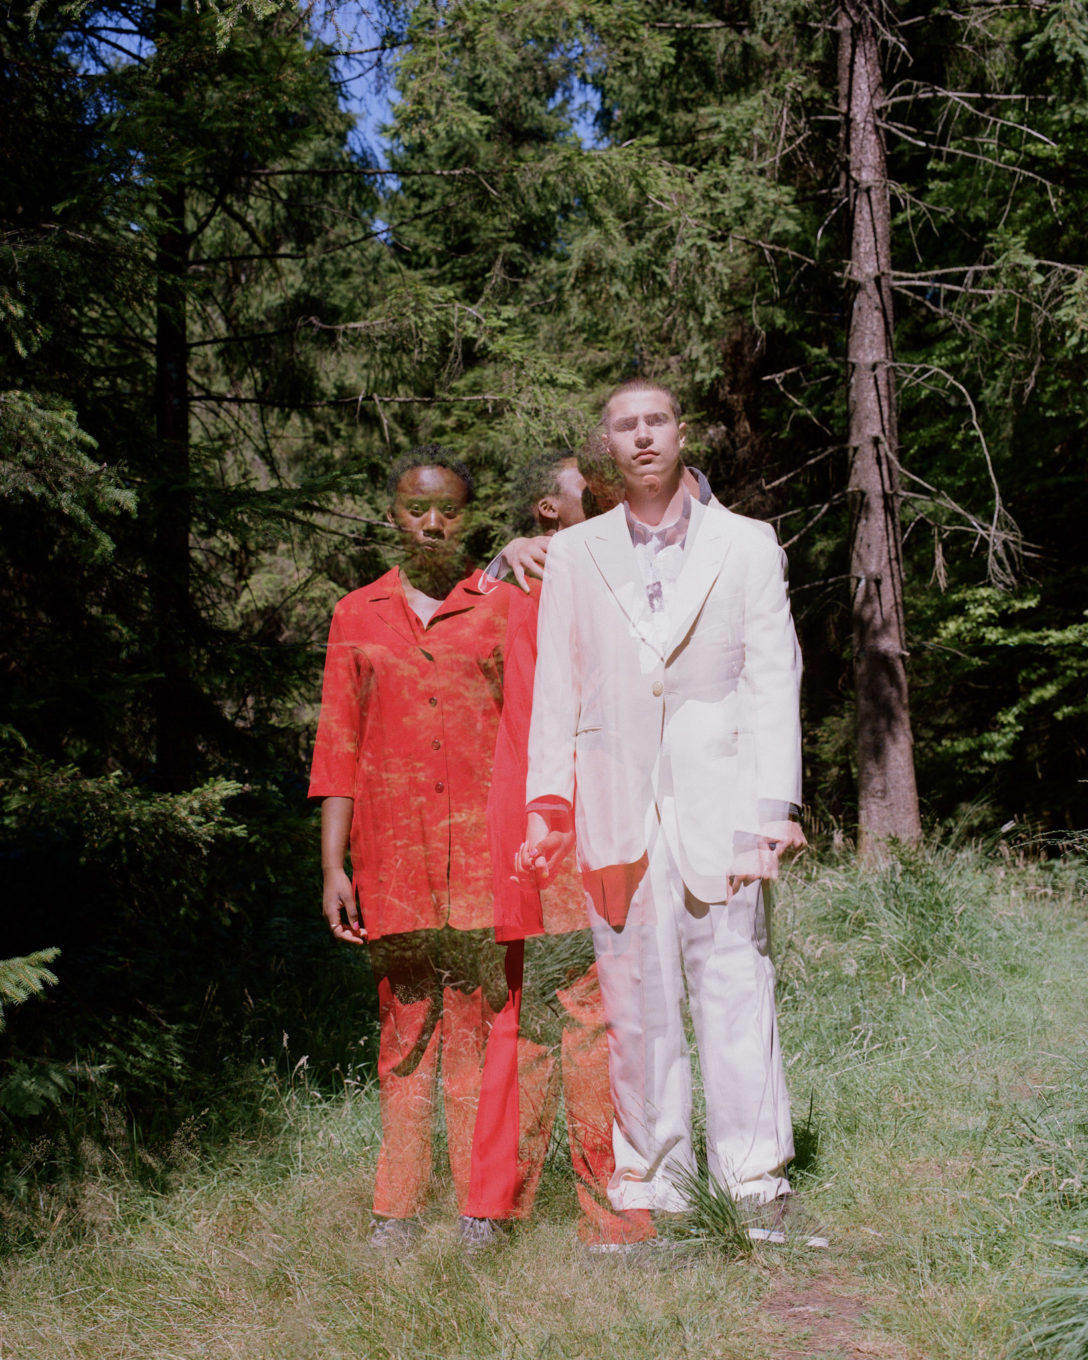 In the woods, a woman in red stands next to a man wearing white.